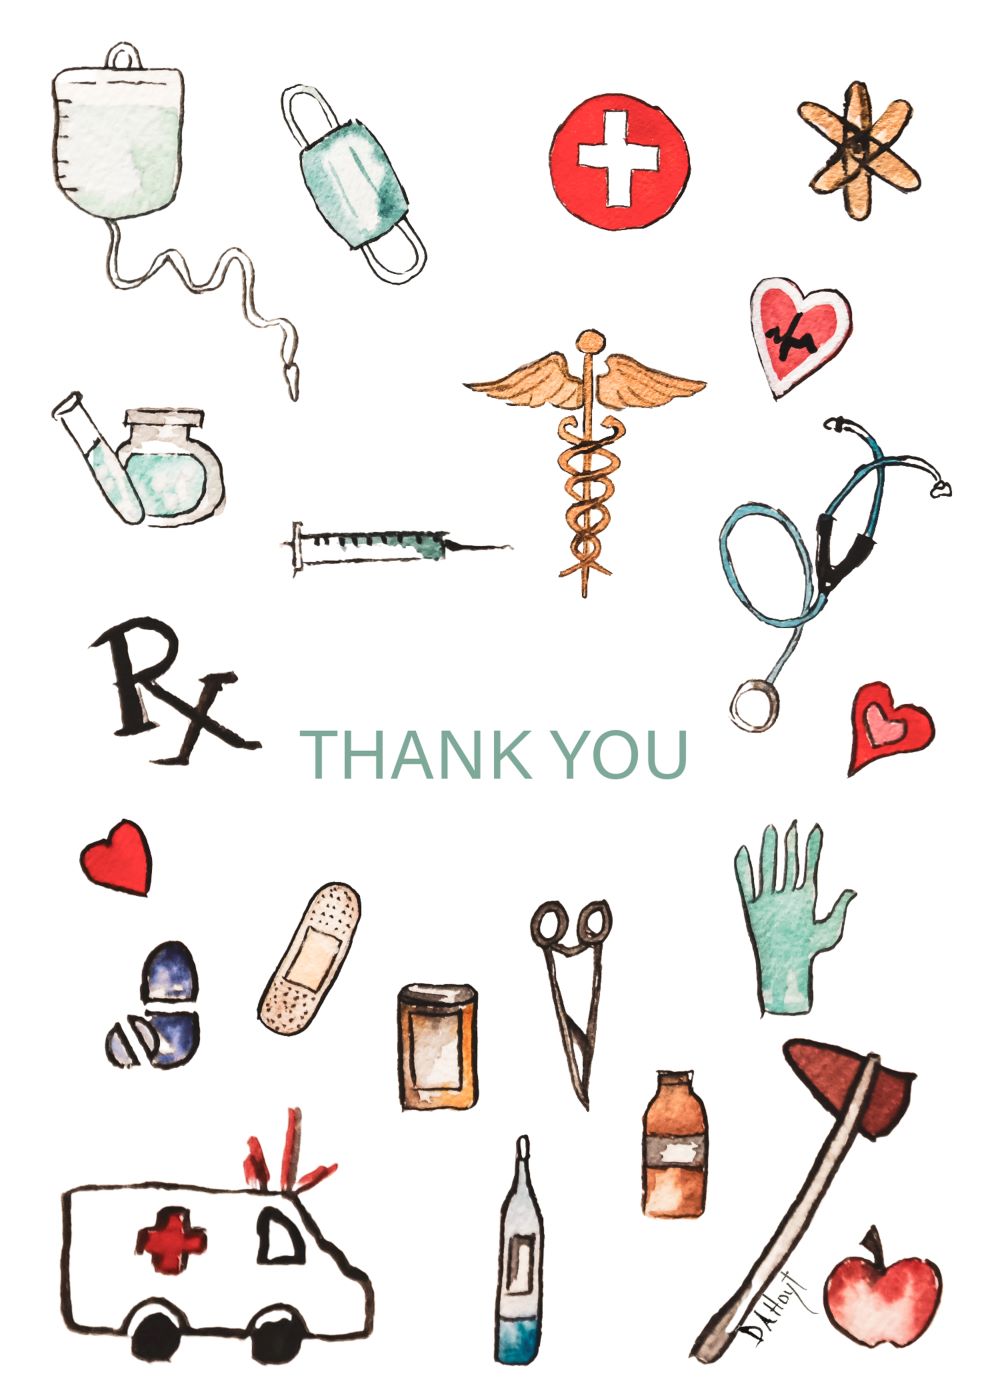 Medical Personnel Thank you - Greeting Card